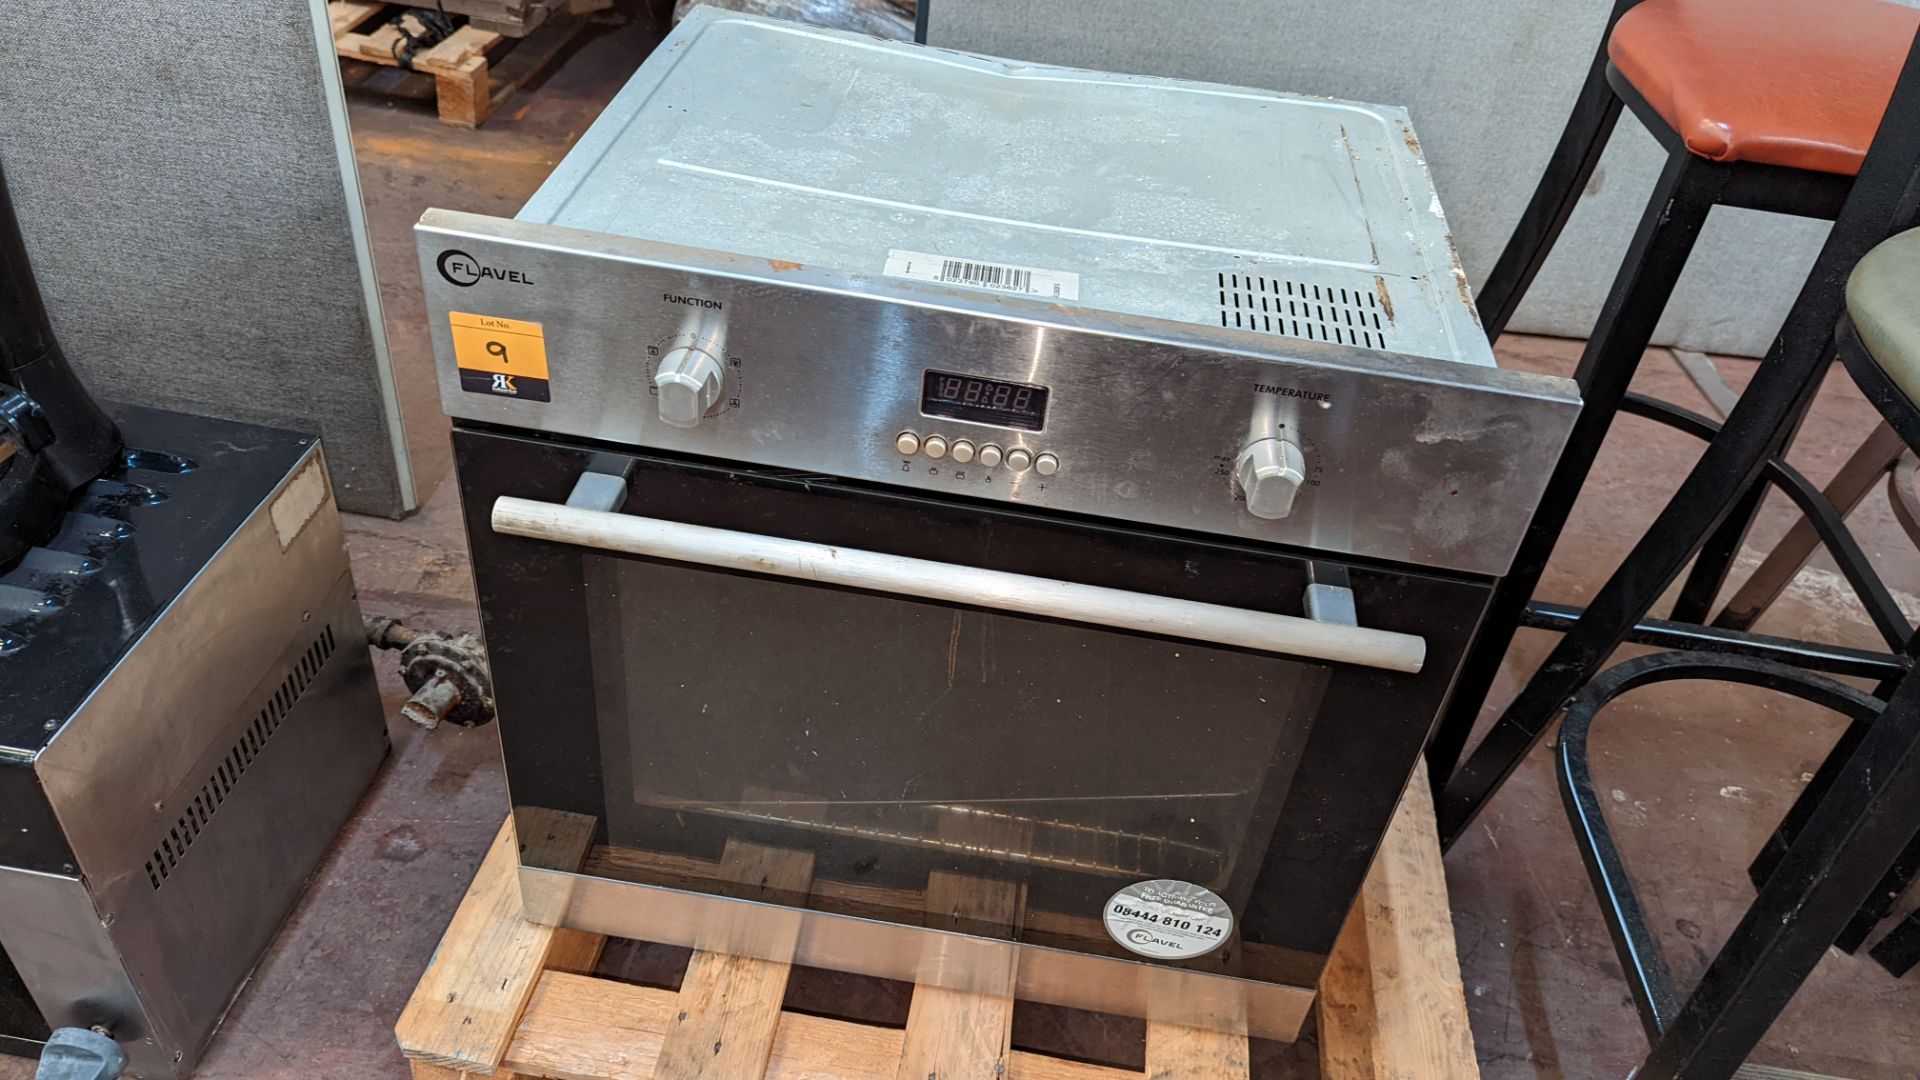 Flavel domestic integrated oven - Image 2 of 6